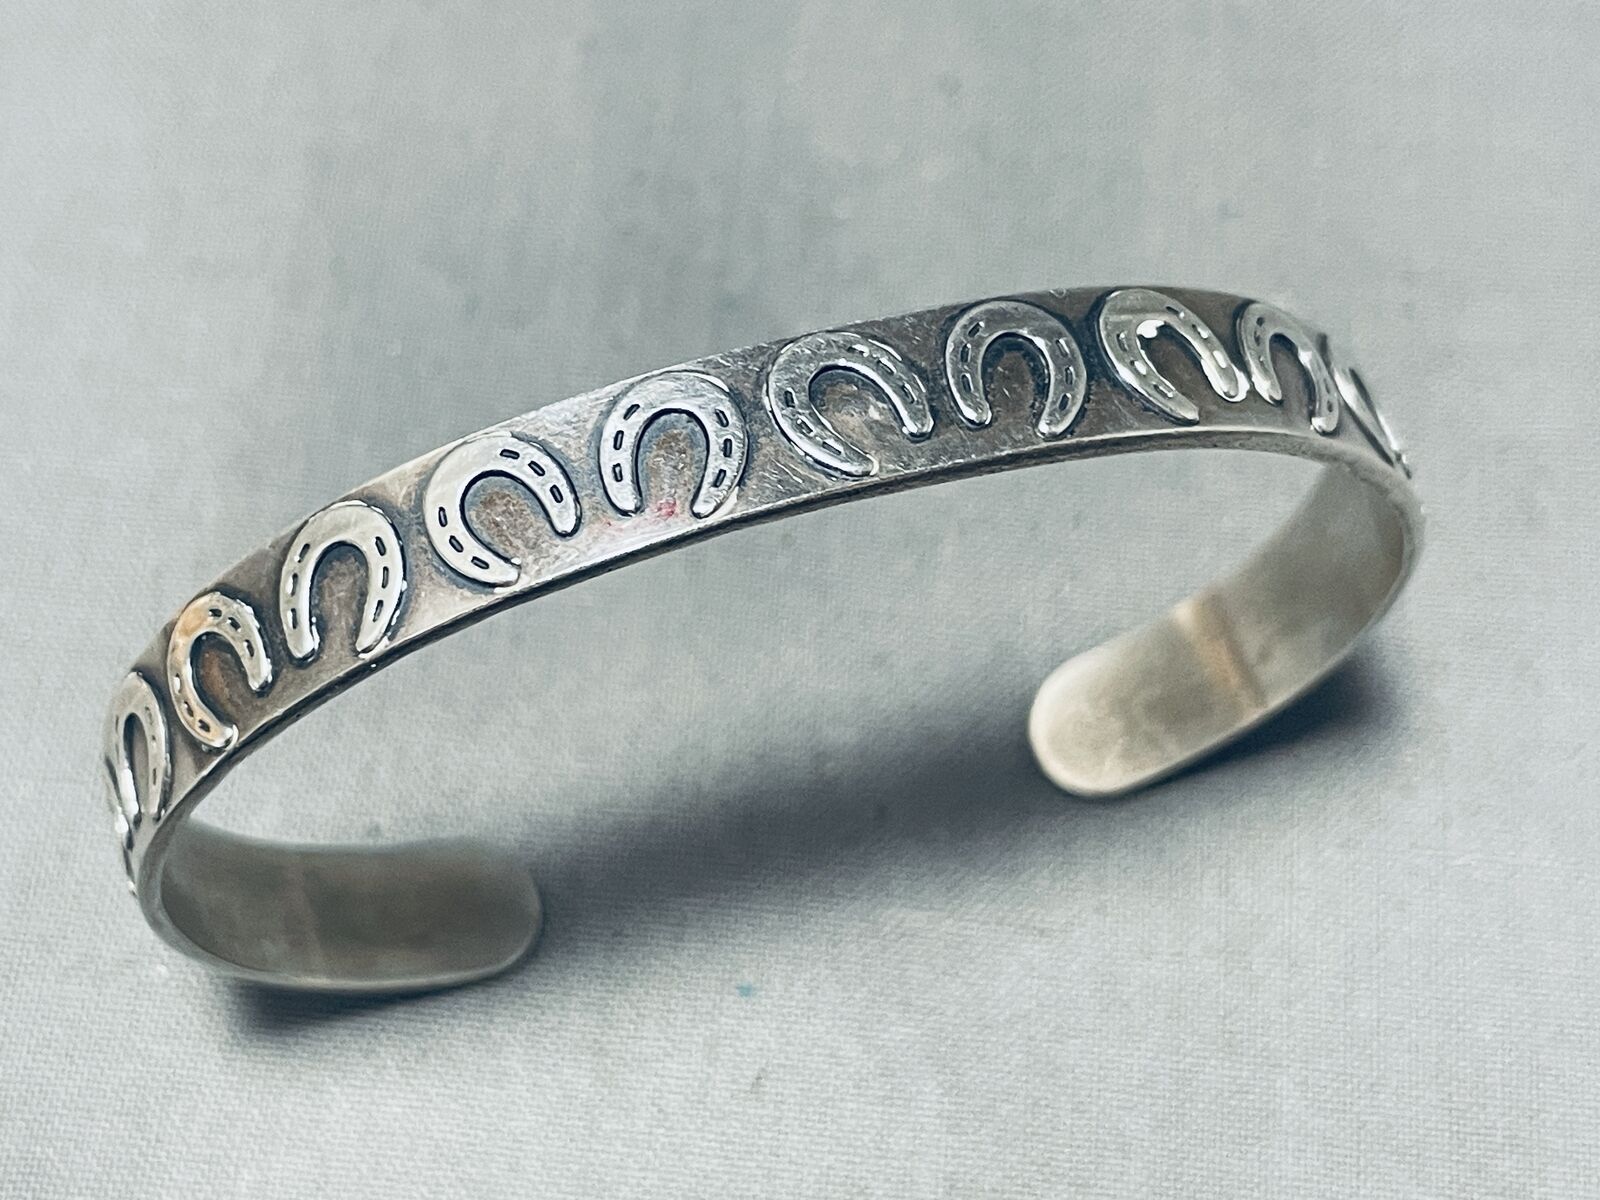 WHIMSICAL NAVAJO/ MEXICAN STERLING SILVER HORSESHOE BRACELET